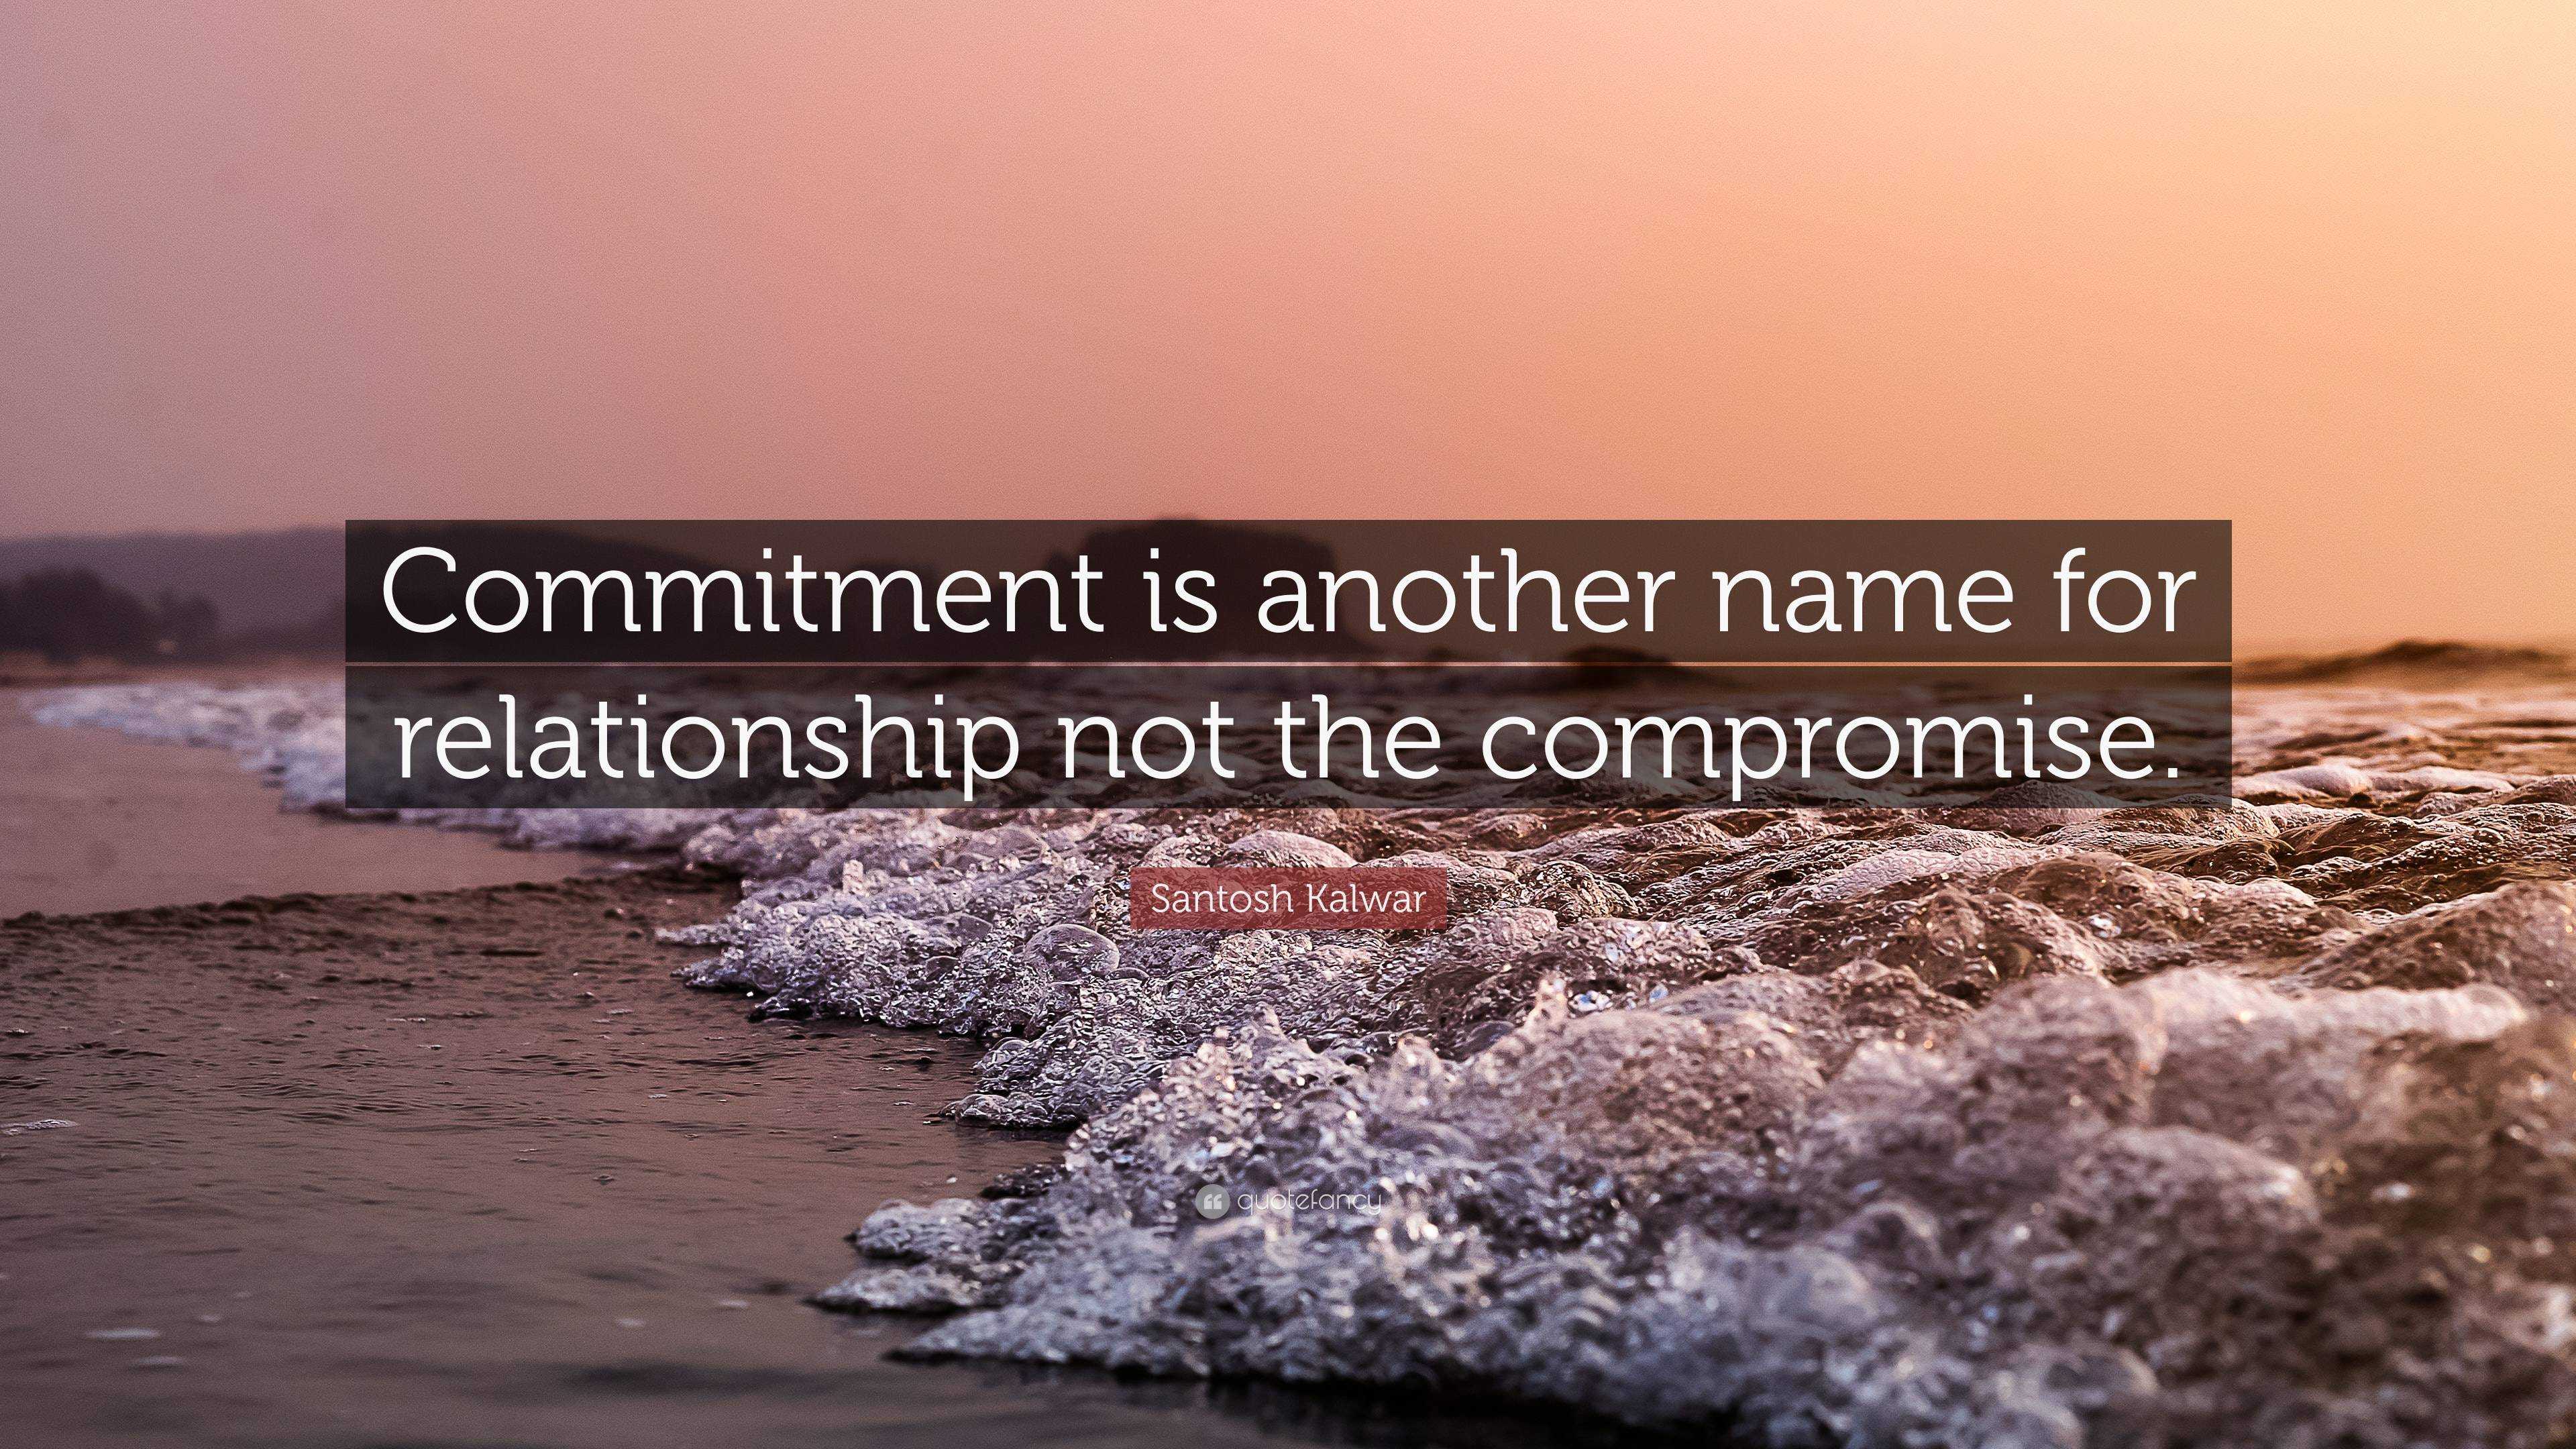 Santosh Kalwar Quote: “Commitment is another name for relationship not the  compromise.”